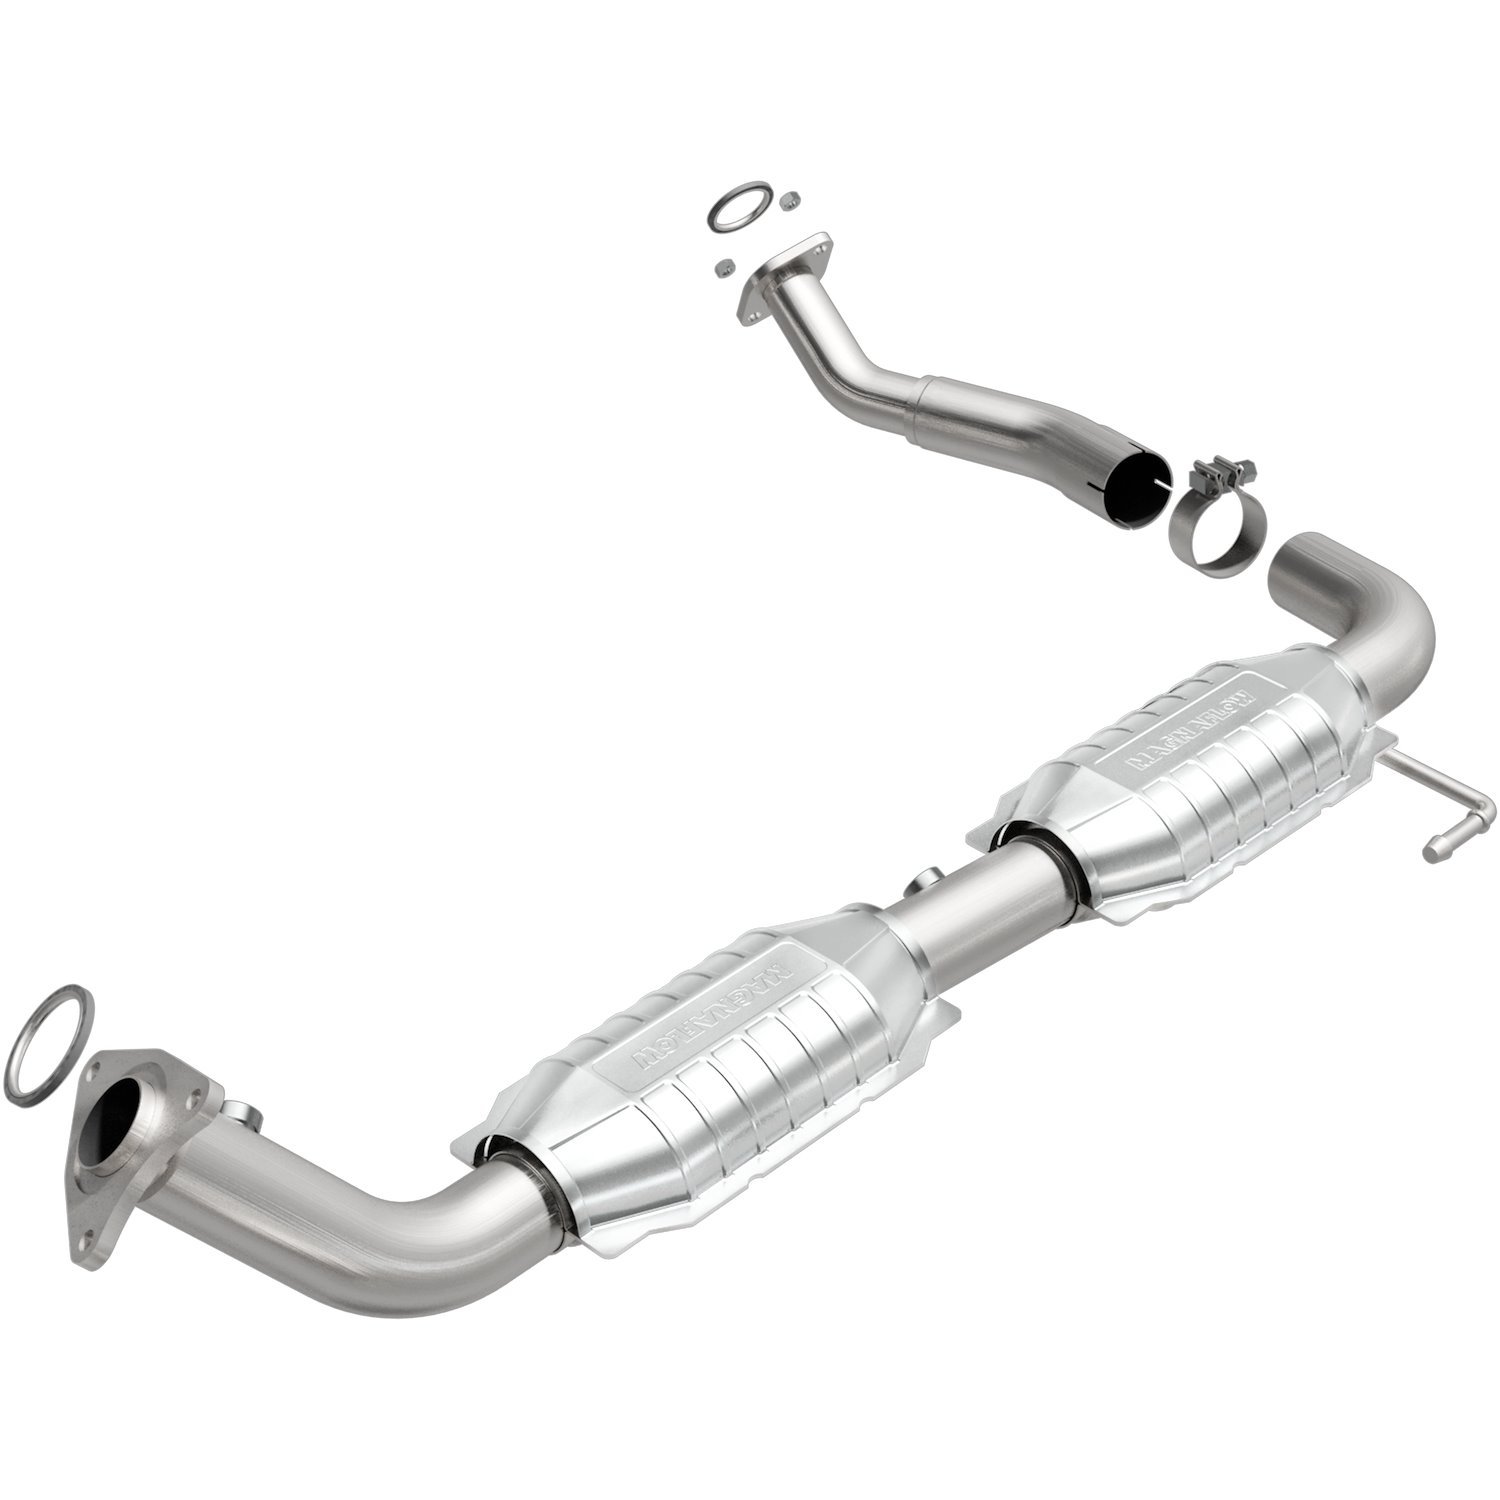 OEM Grade Federal / EPA Compliant Direct-Fit Catalytic Converter 49625